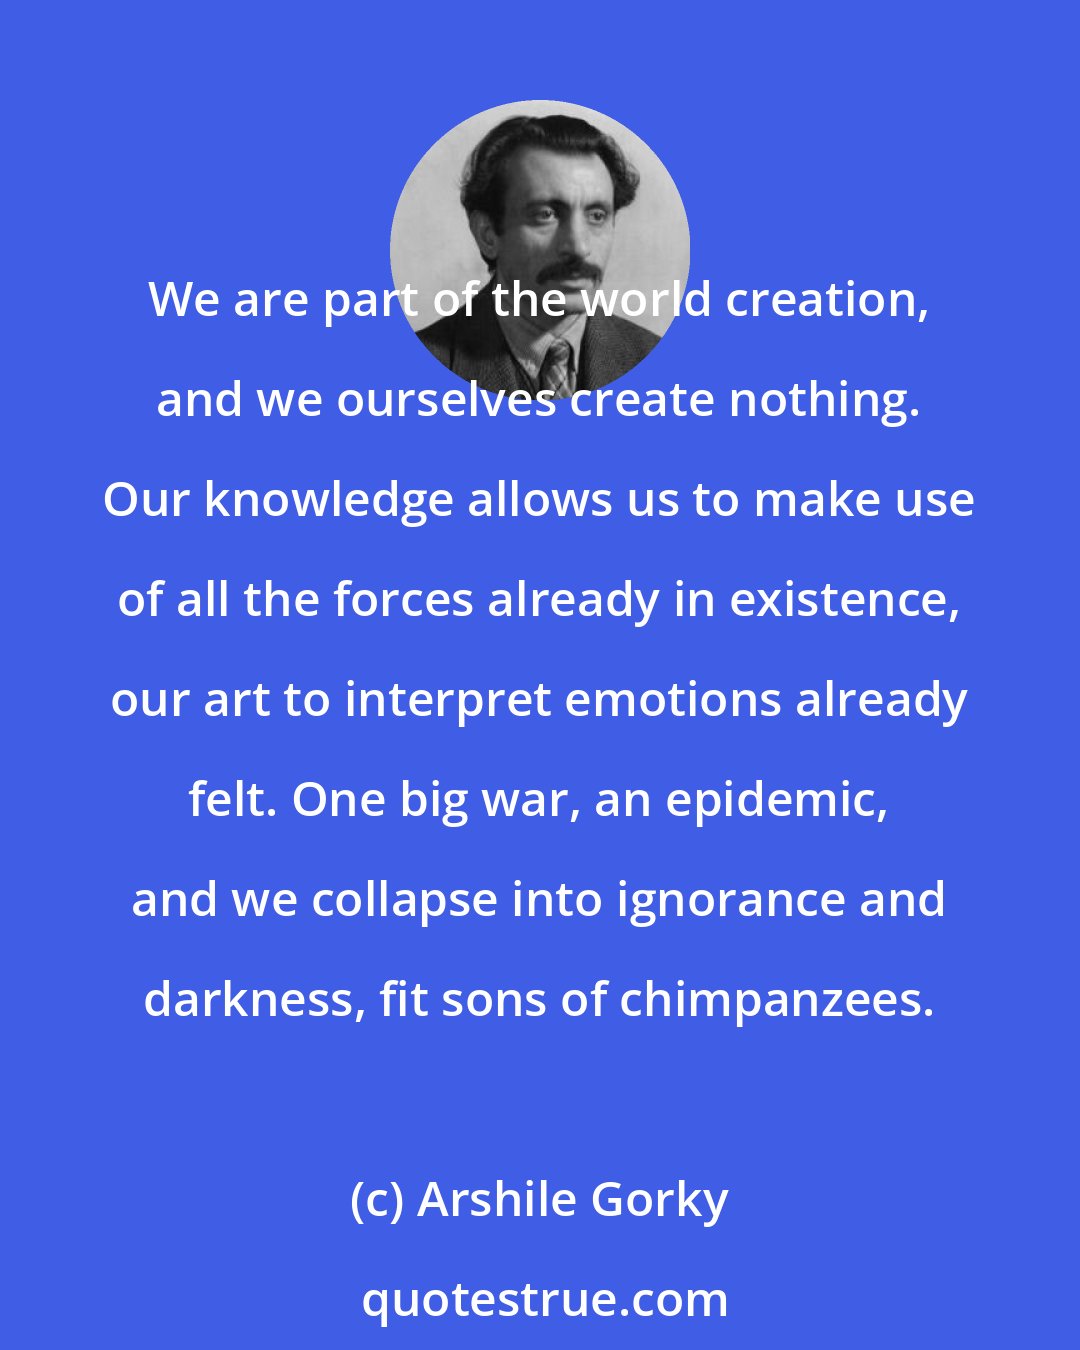 Arshile Gorky: We are part of the world creation, and we ourselves create nothing. Our knowledge allows us to make use of all the forces already in existence, our art to interpret emotions already felt. One big war, an epidemic, and we collapse into ignorance and darkness, fit sons of chimpanzees.